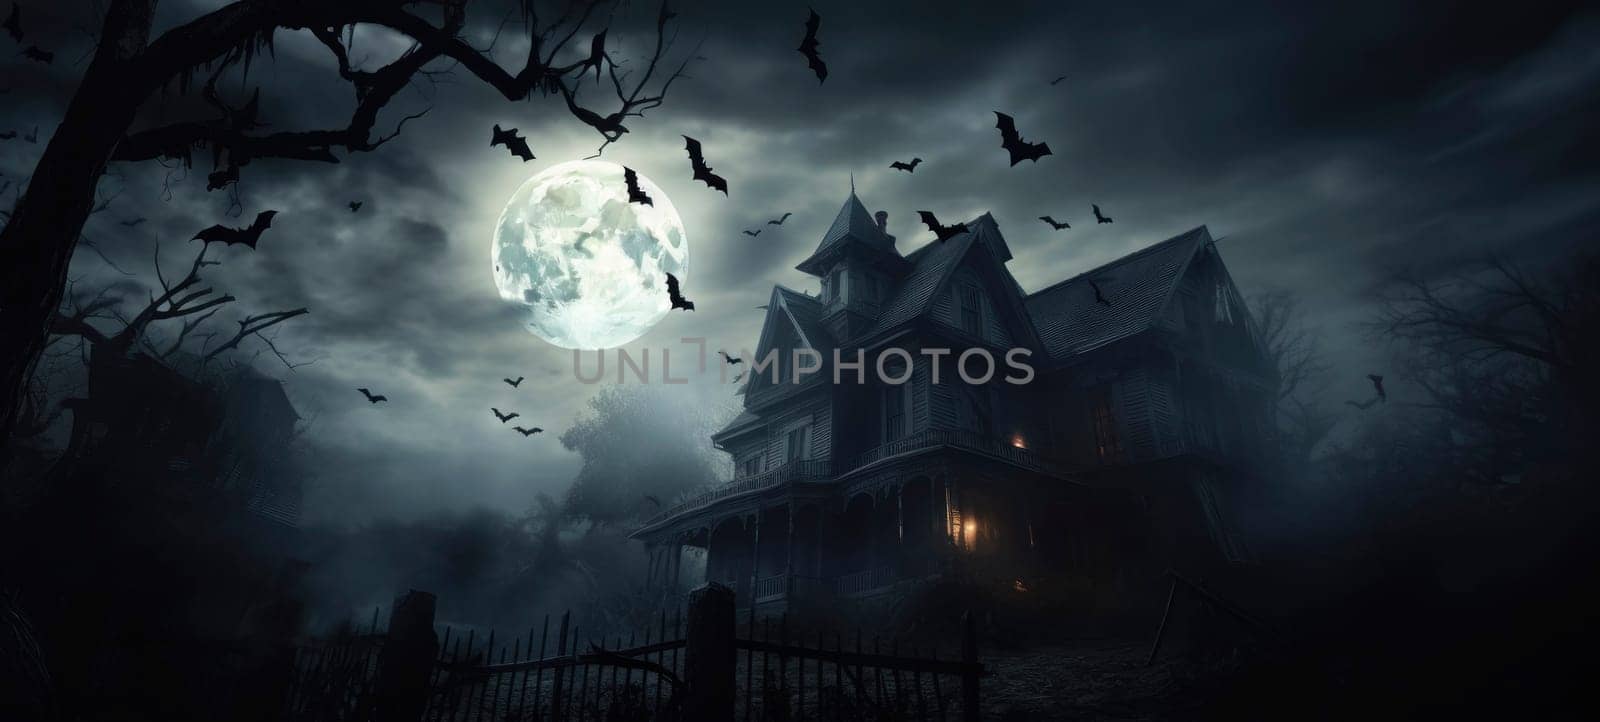 A gothic house surrounded by flying bats under the full moon